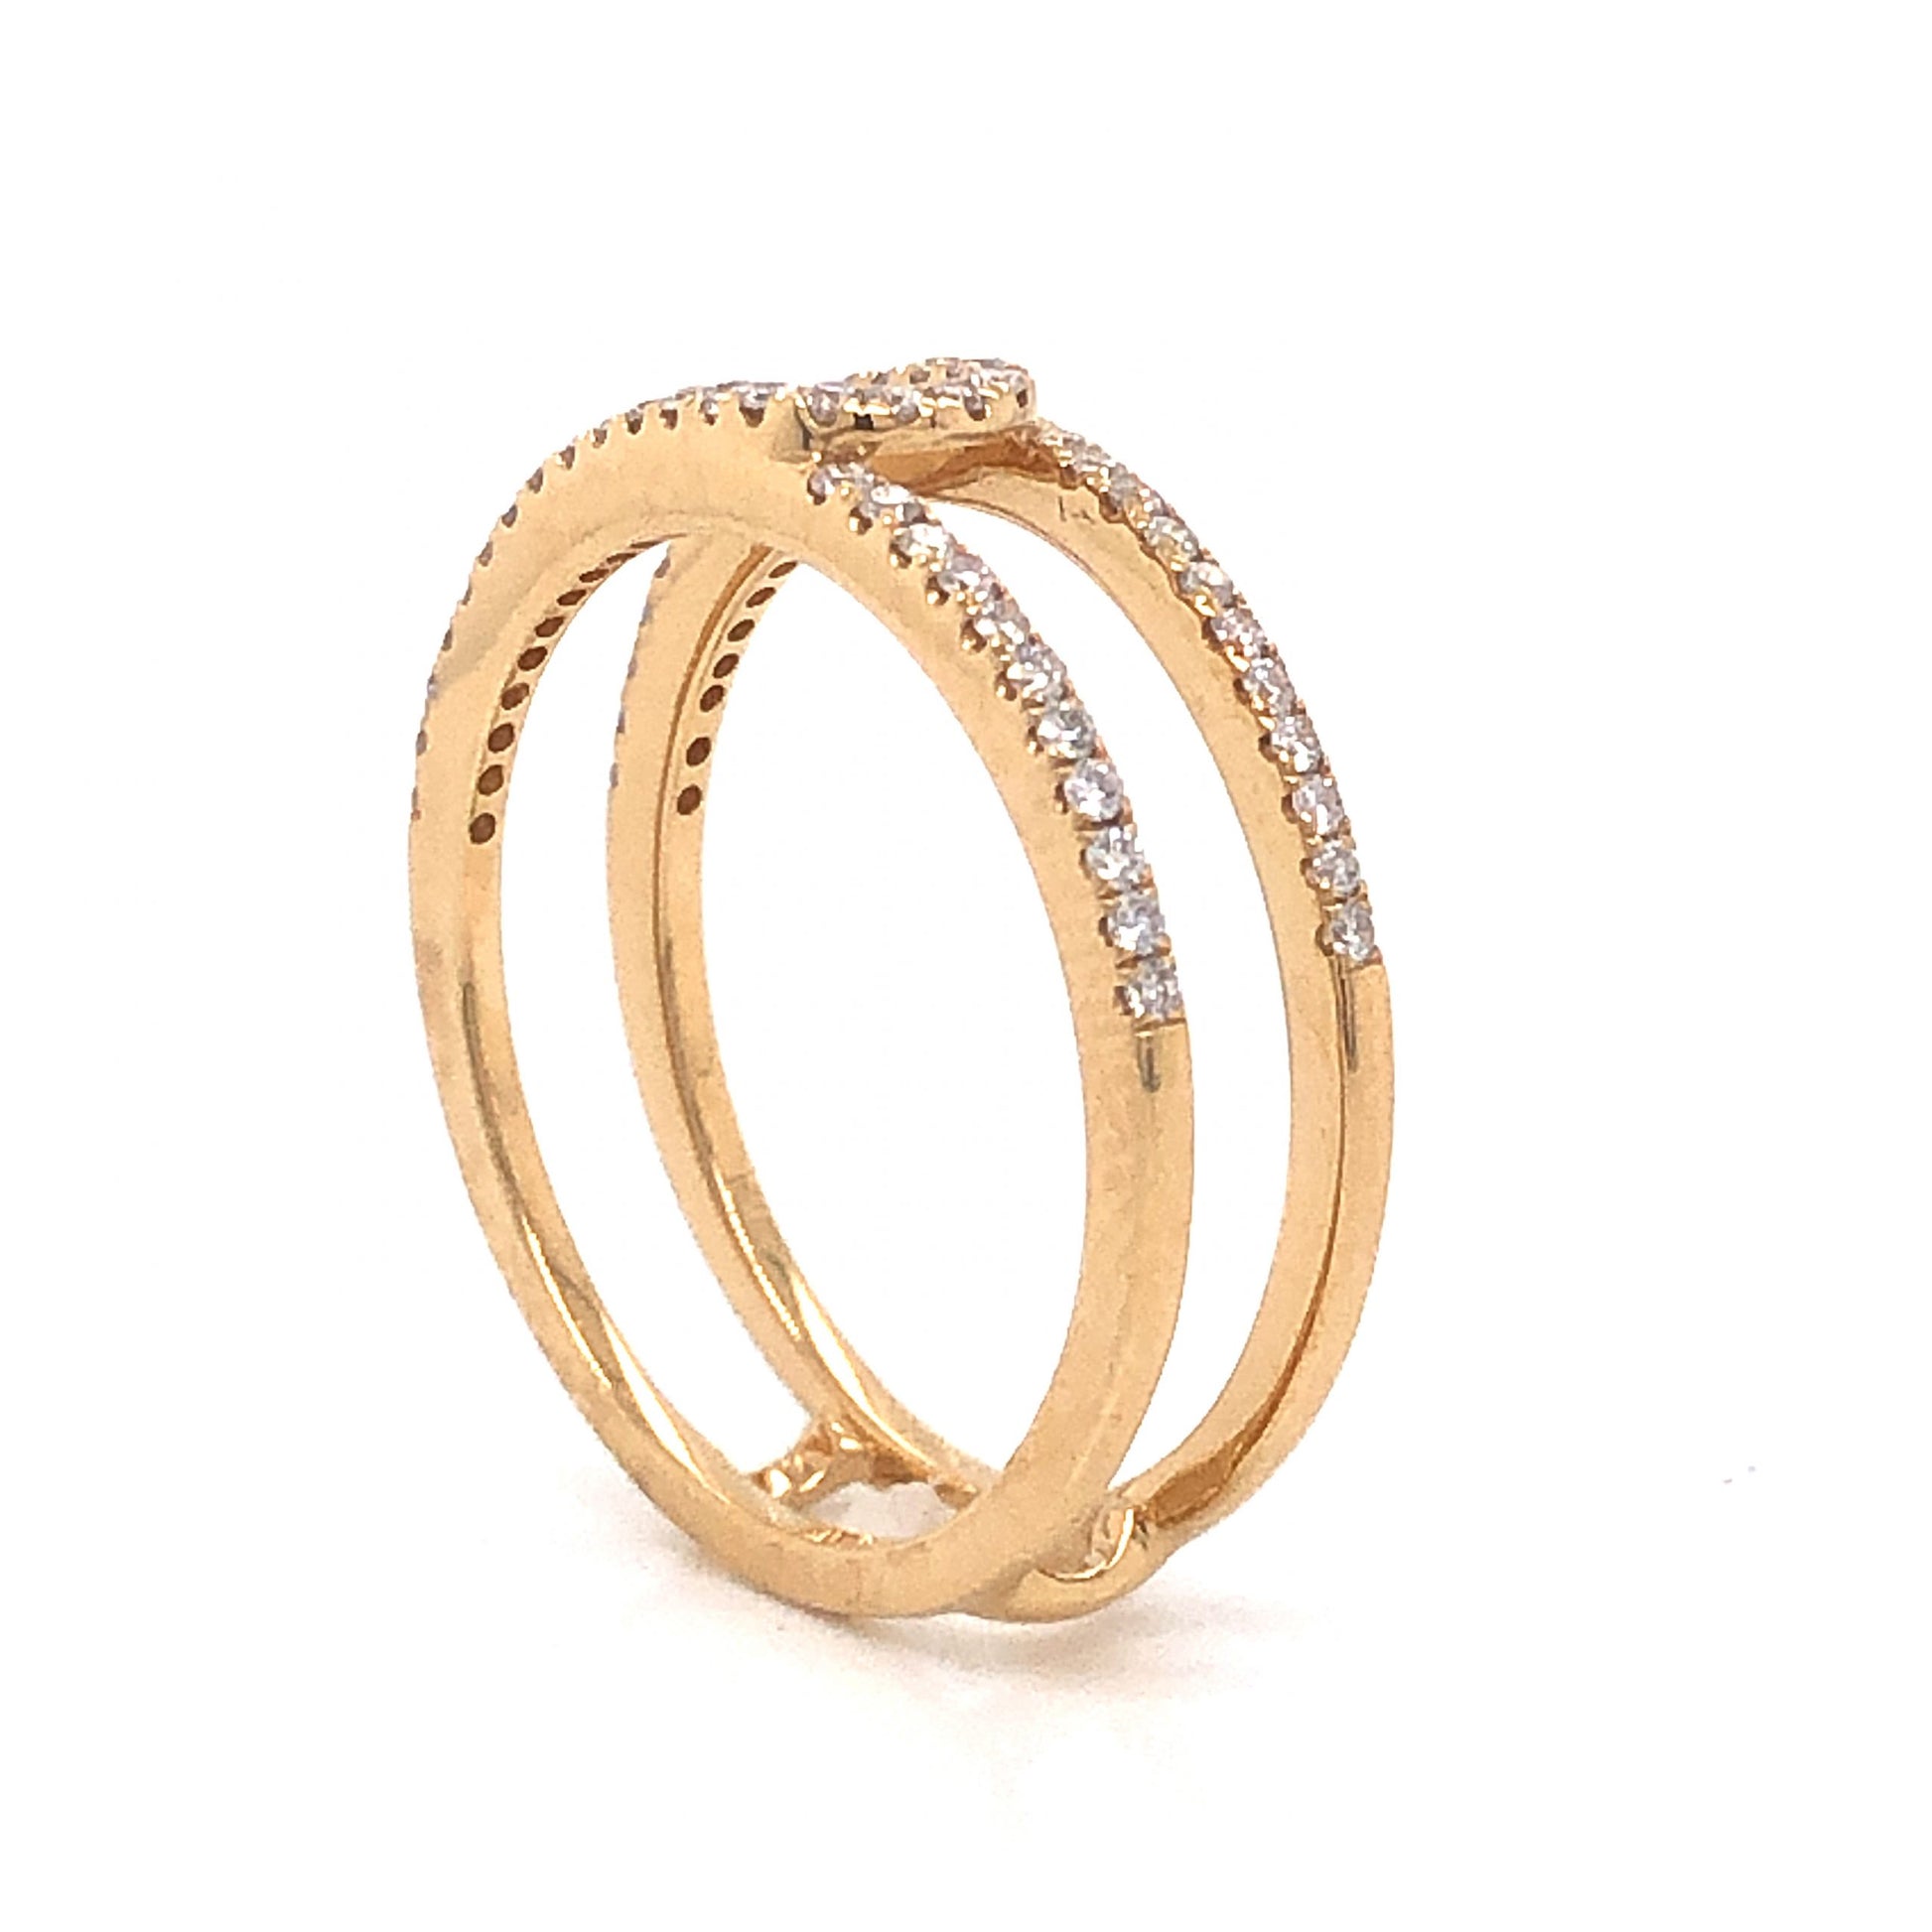 Pave Diamond Double Band Stacking Ring in 18k Yellow GoldComposition: 18 Karat Yellow Gold Ring Size: 7 Total Diamond Weight: .29ct Total Gram Weight: 3.0 g Inscription: 18k 750
      